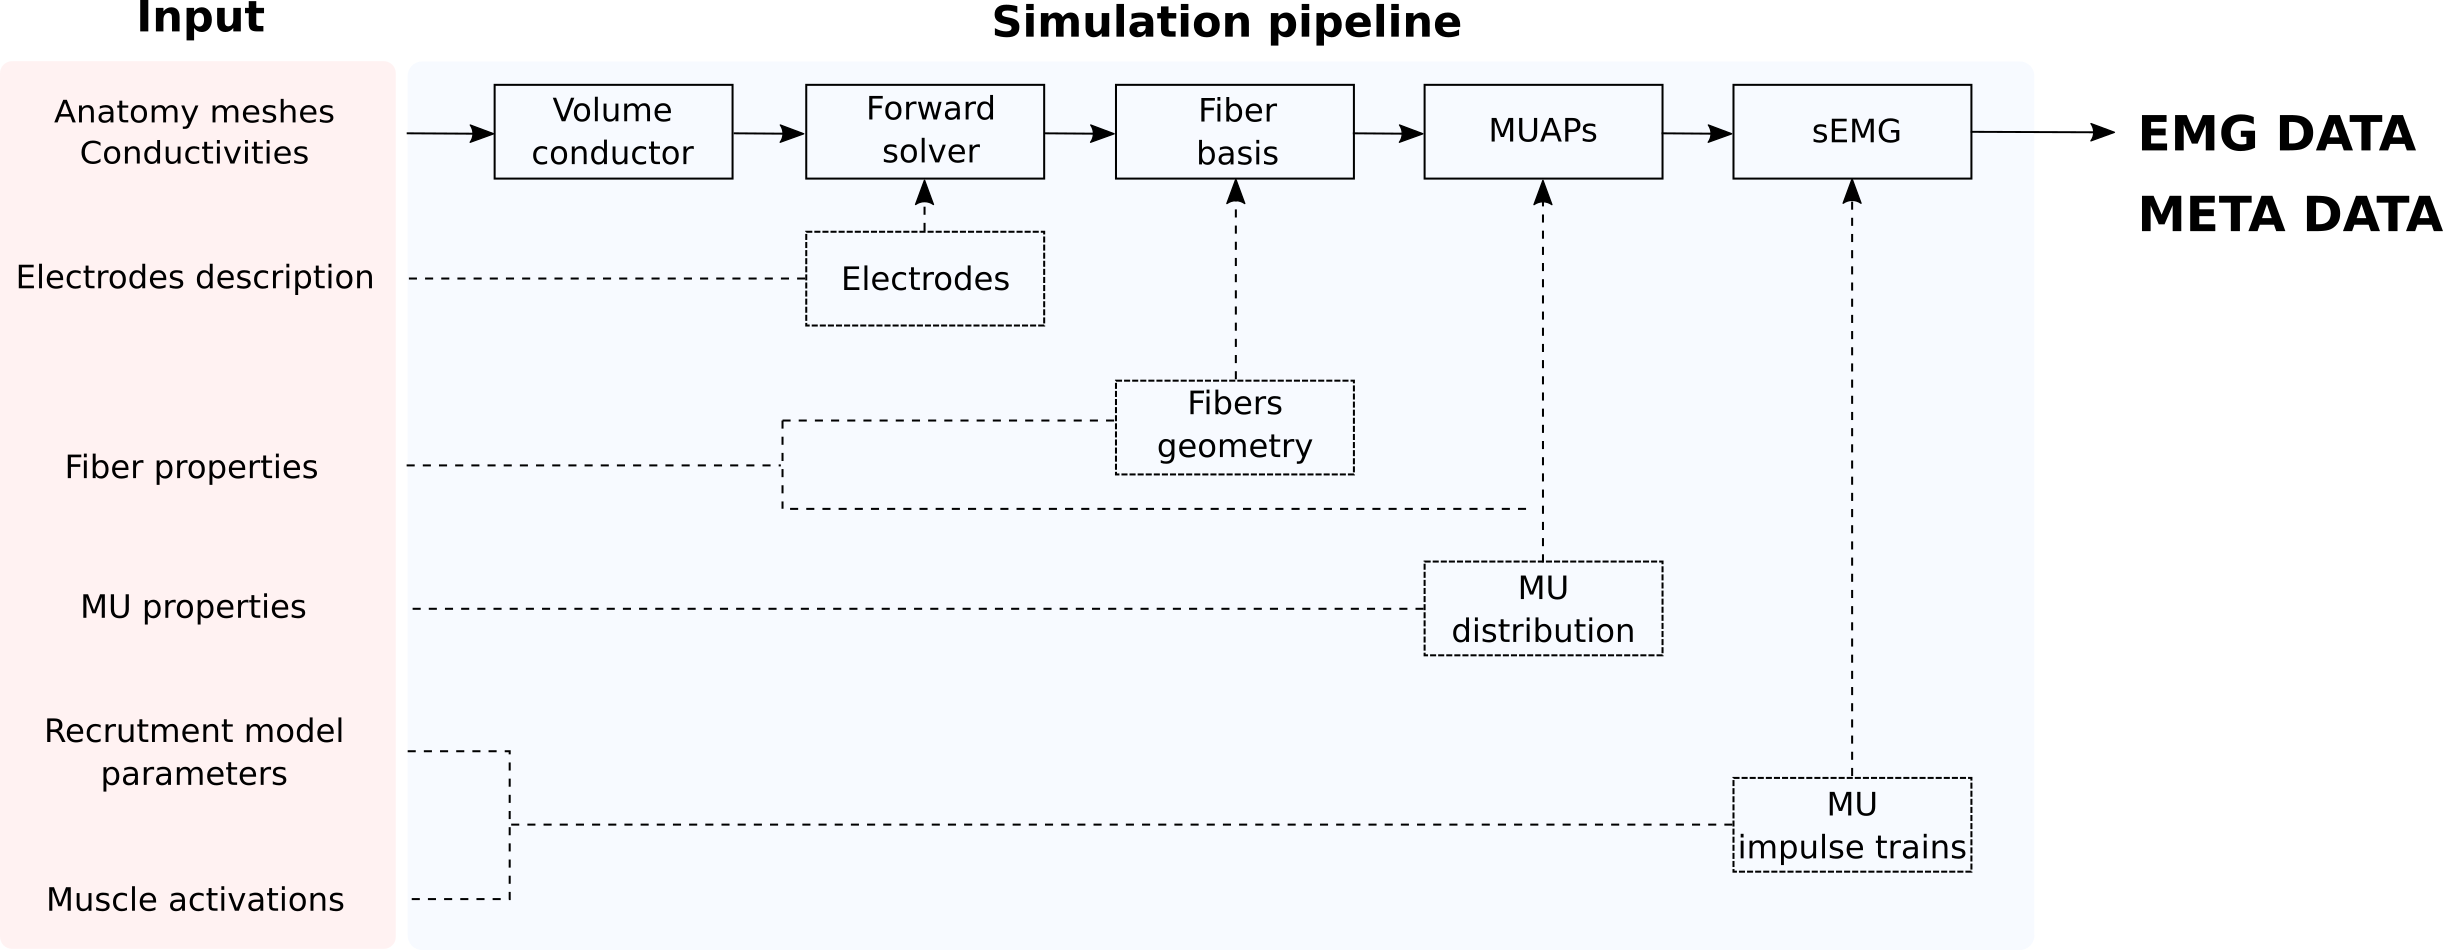 ../_images/simulation_pipeline.png